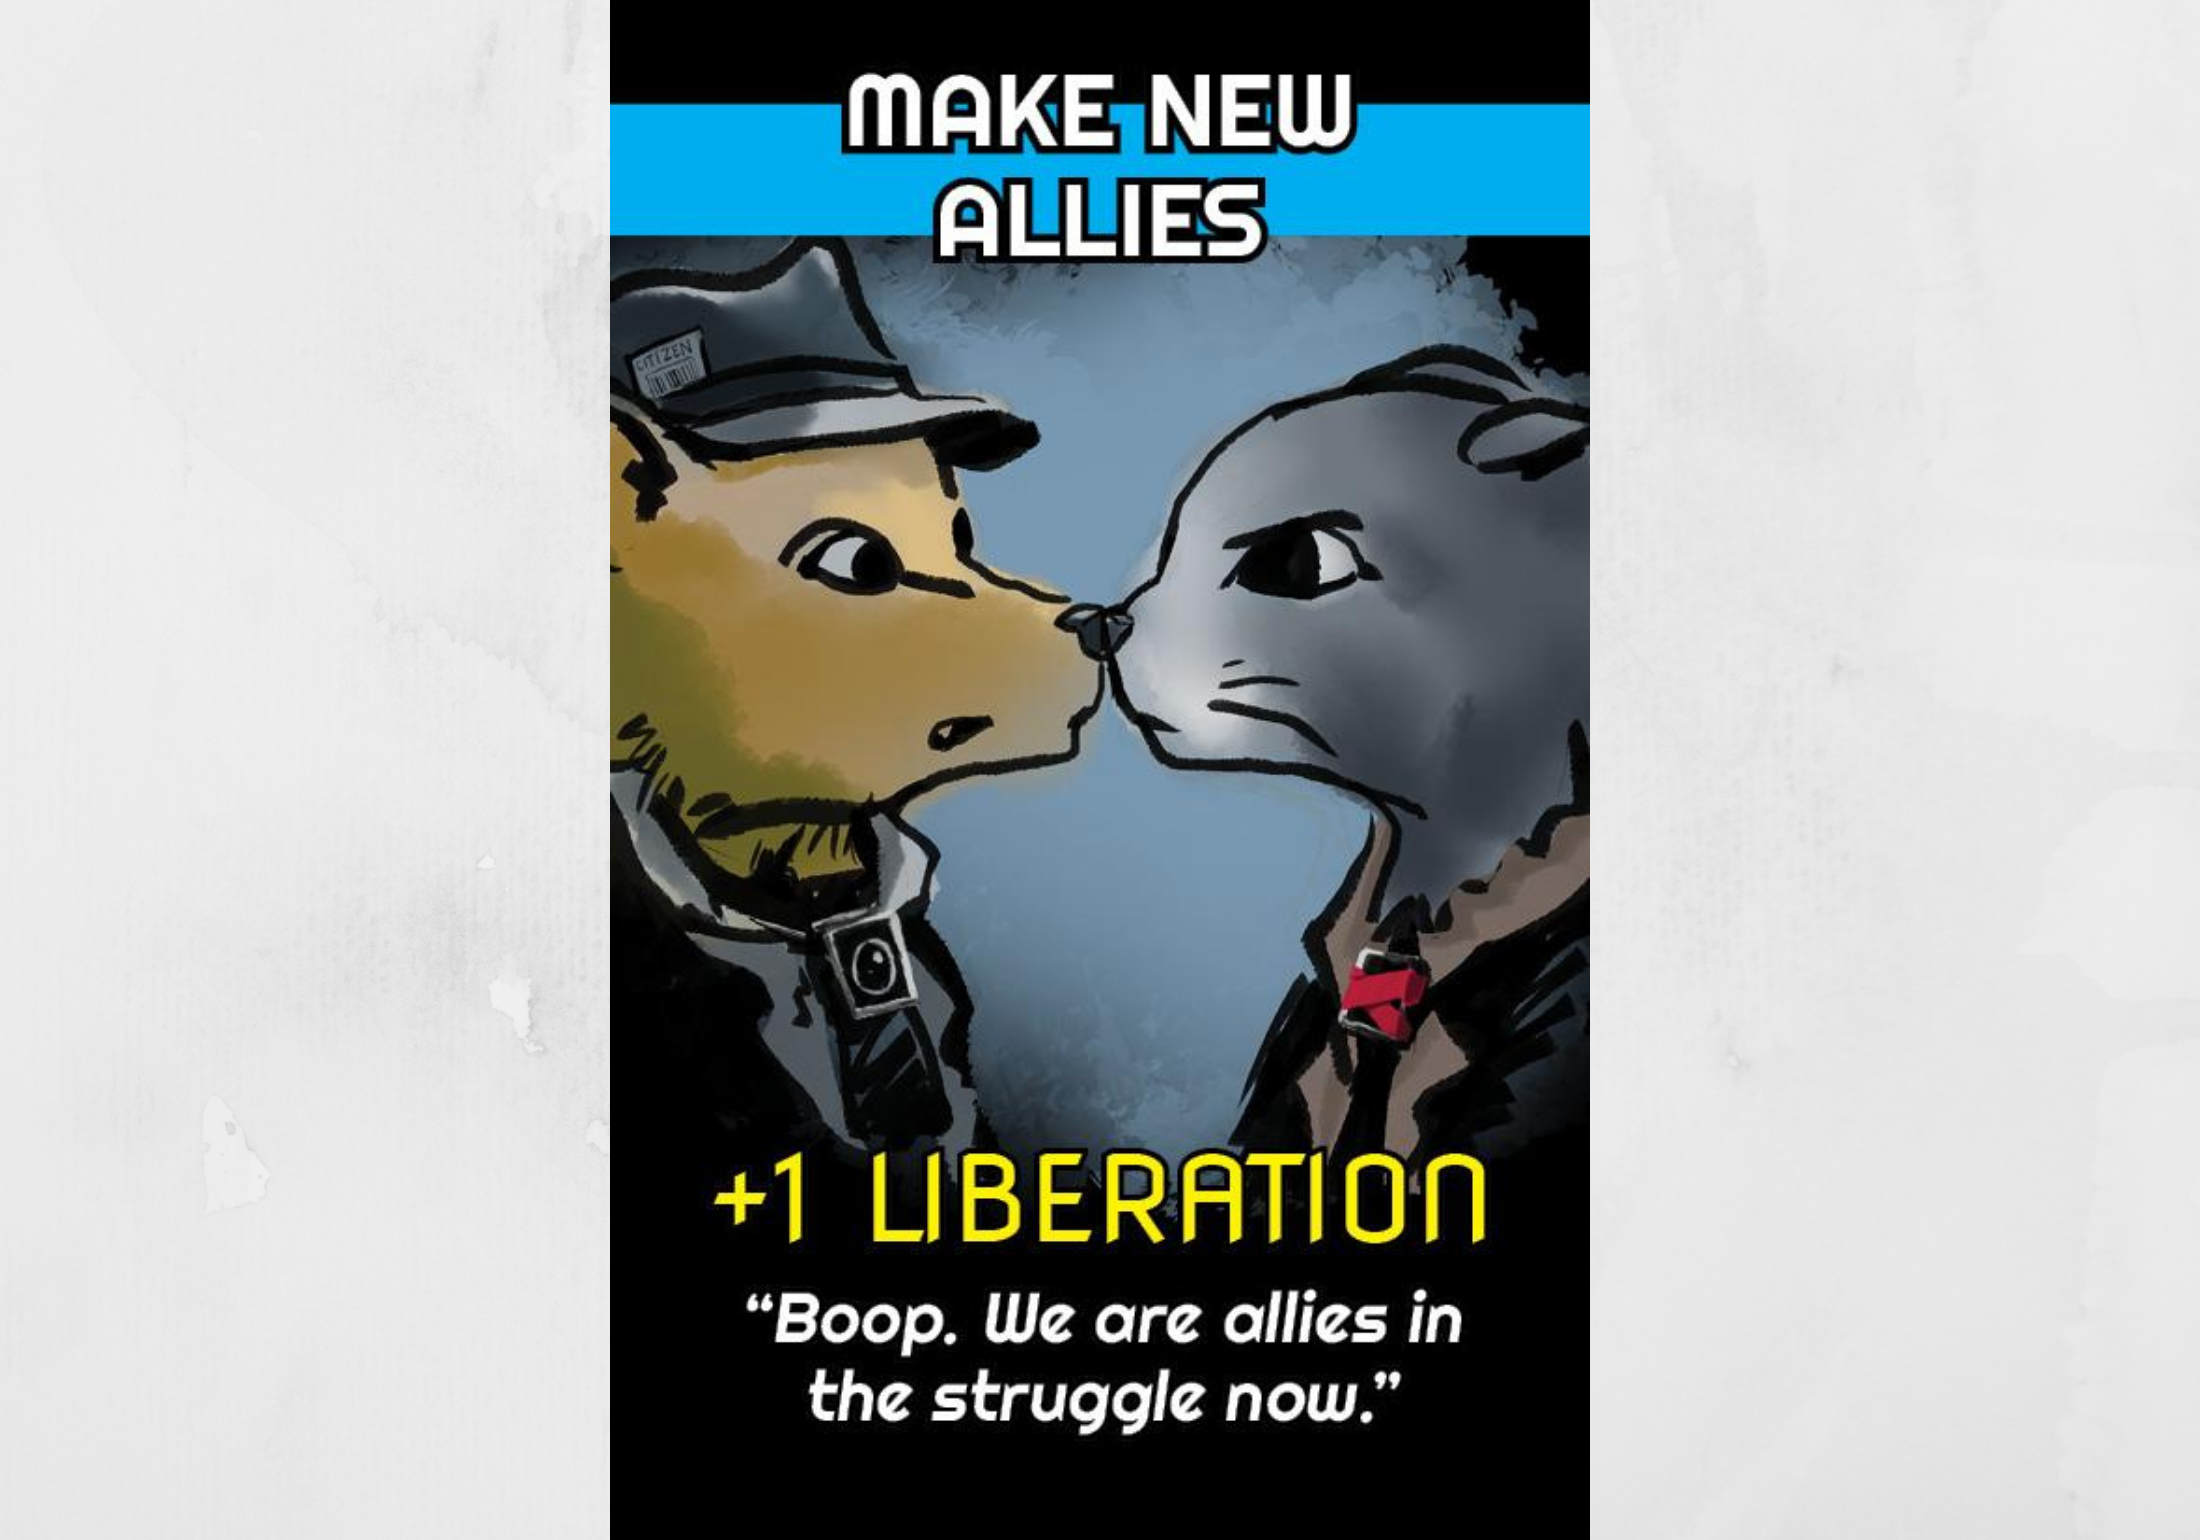 Space Cats Fight Fascism: The Board Game